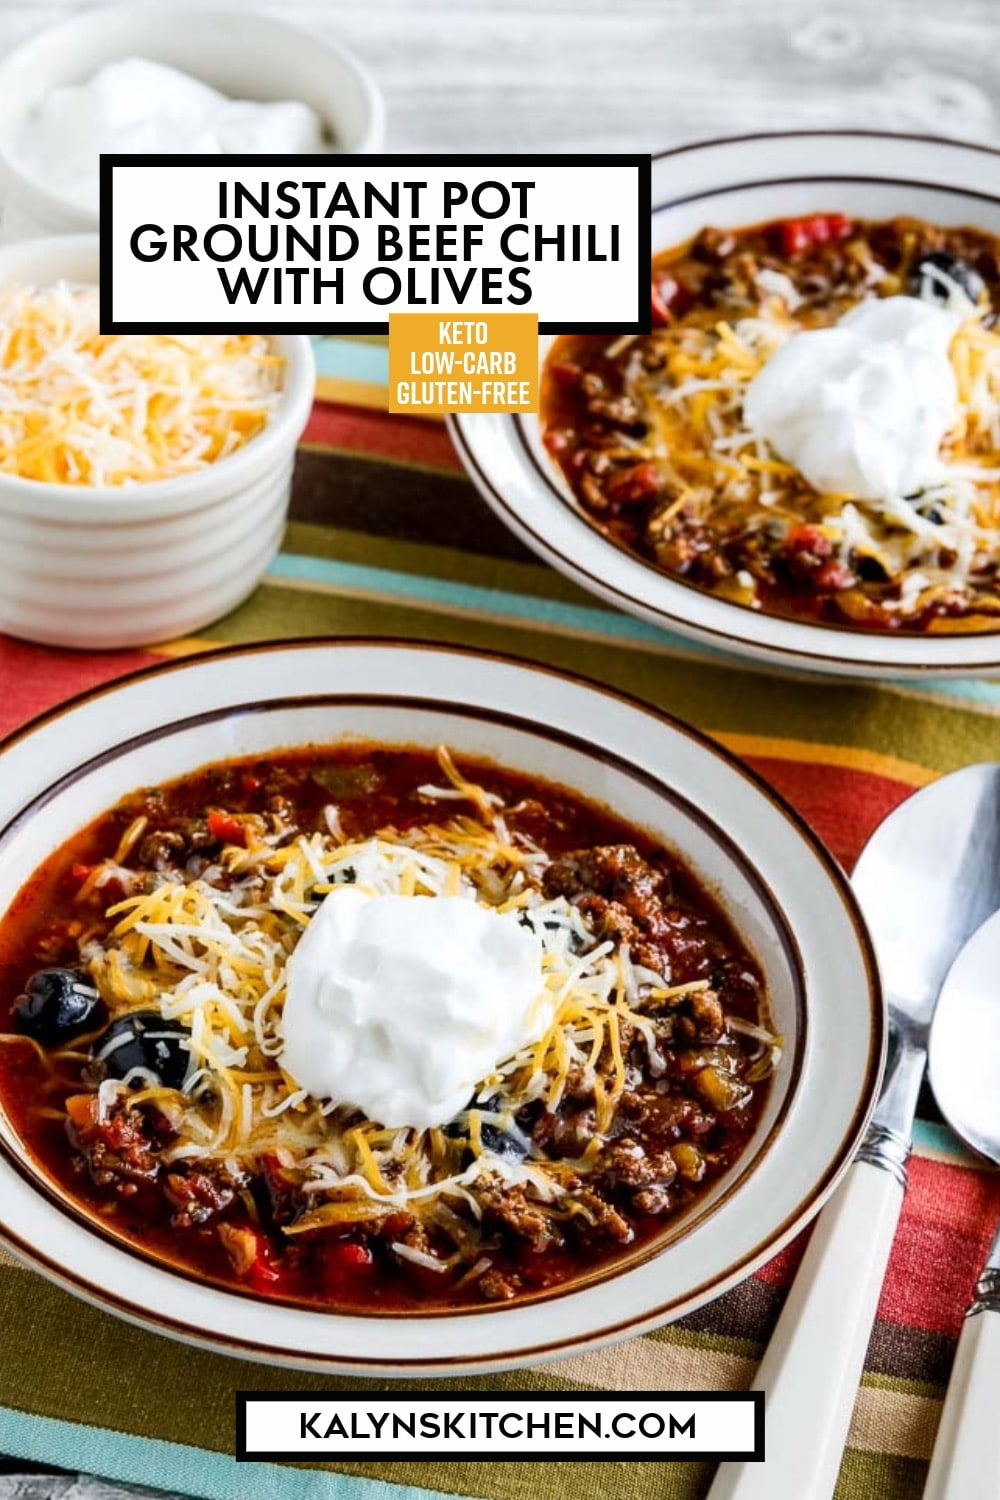 Pinterest image of Instant Pot Ground Beef Chili with Olives